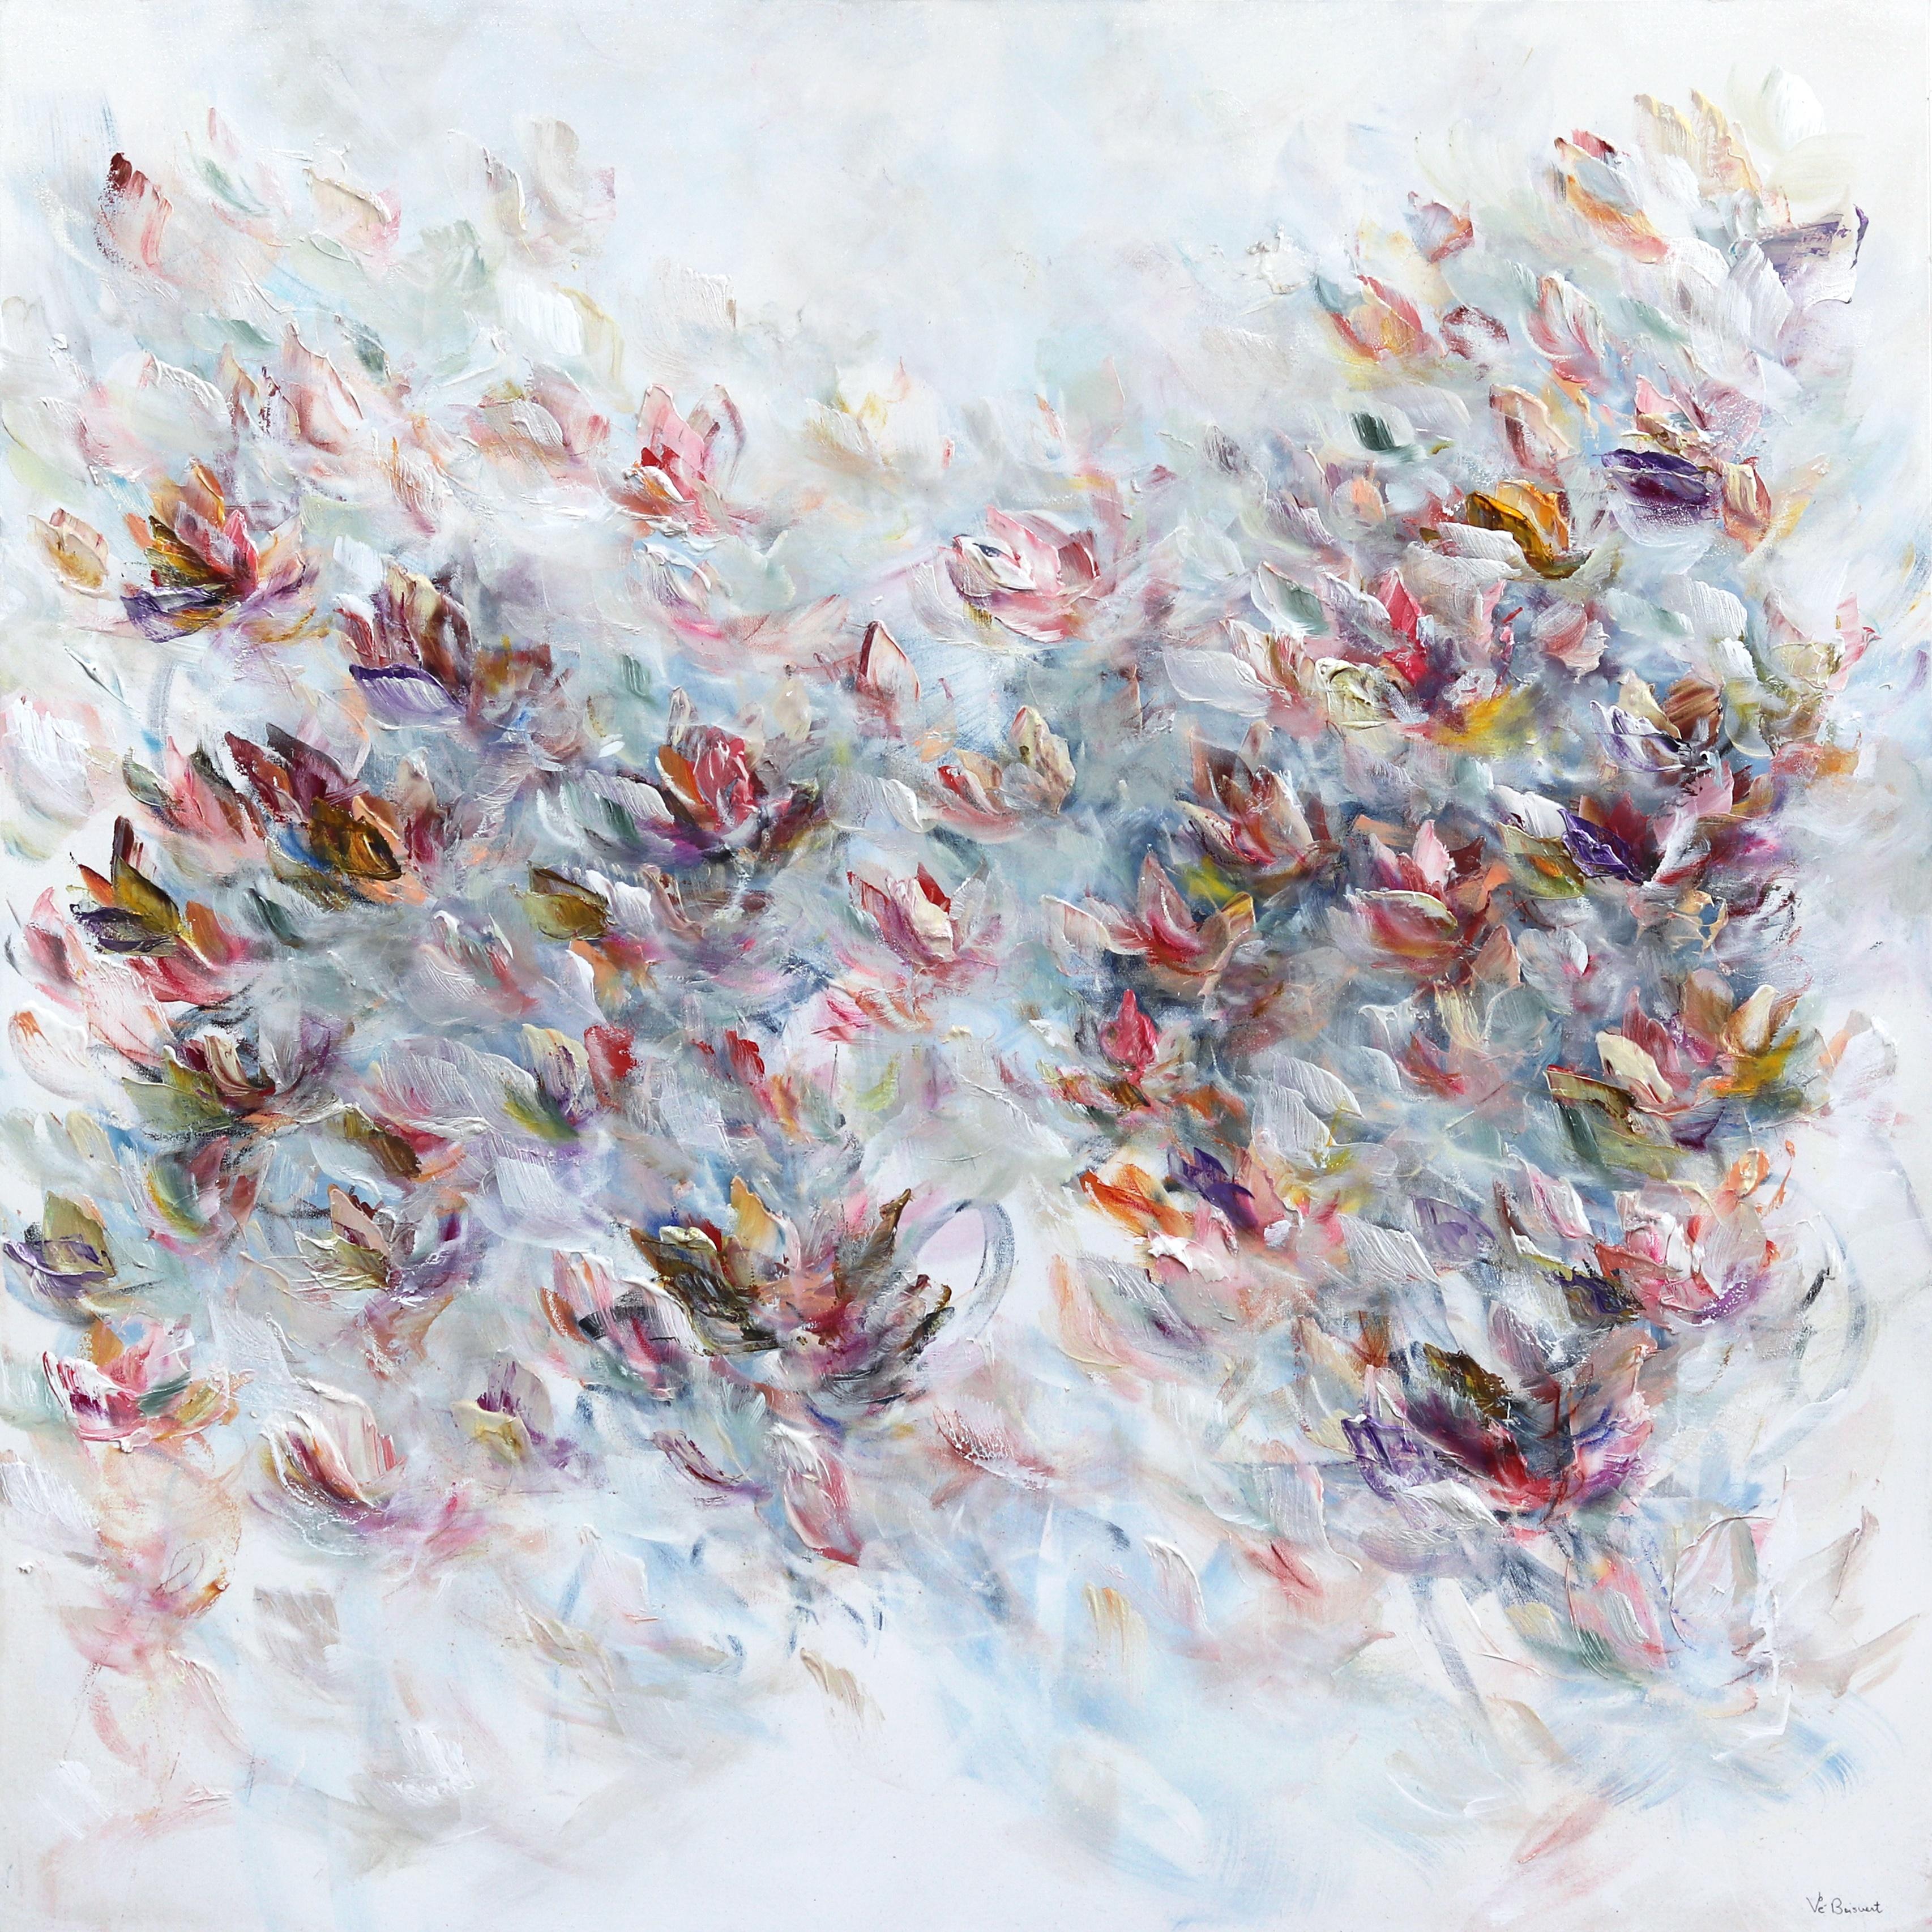 Self-Love is Luxury - Soft Abstract Floral Landscape Painting - Art by Vè Boisvert